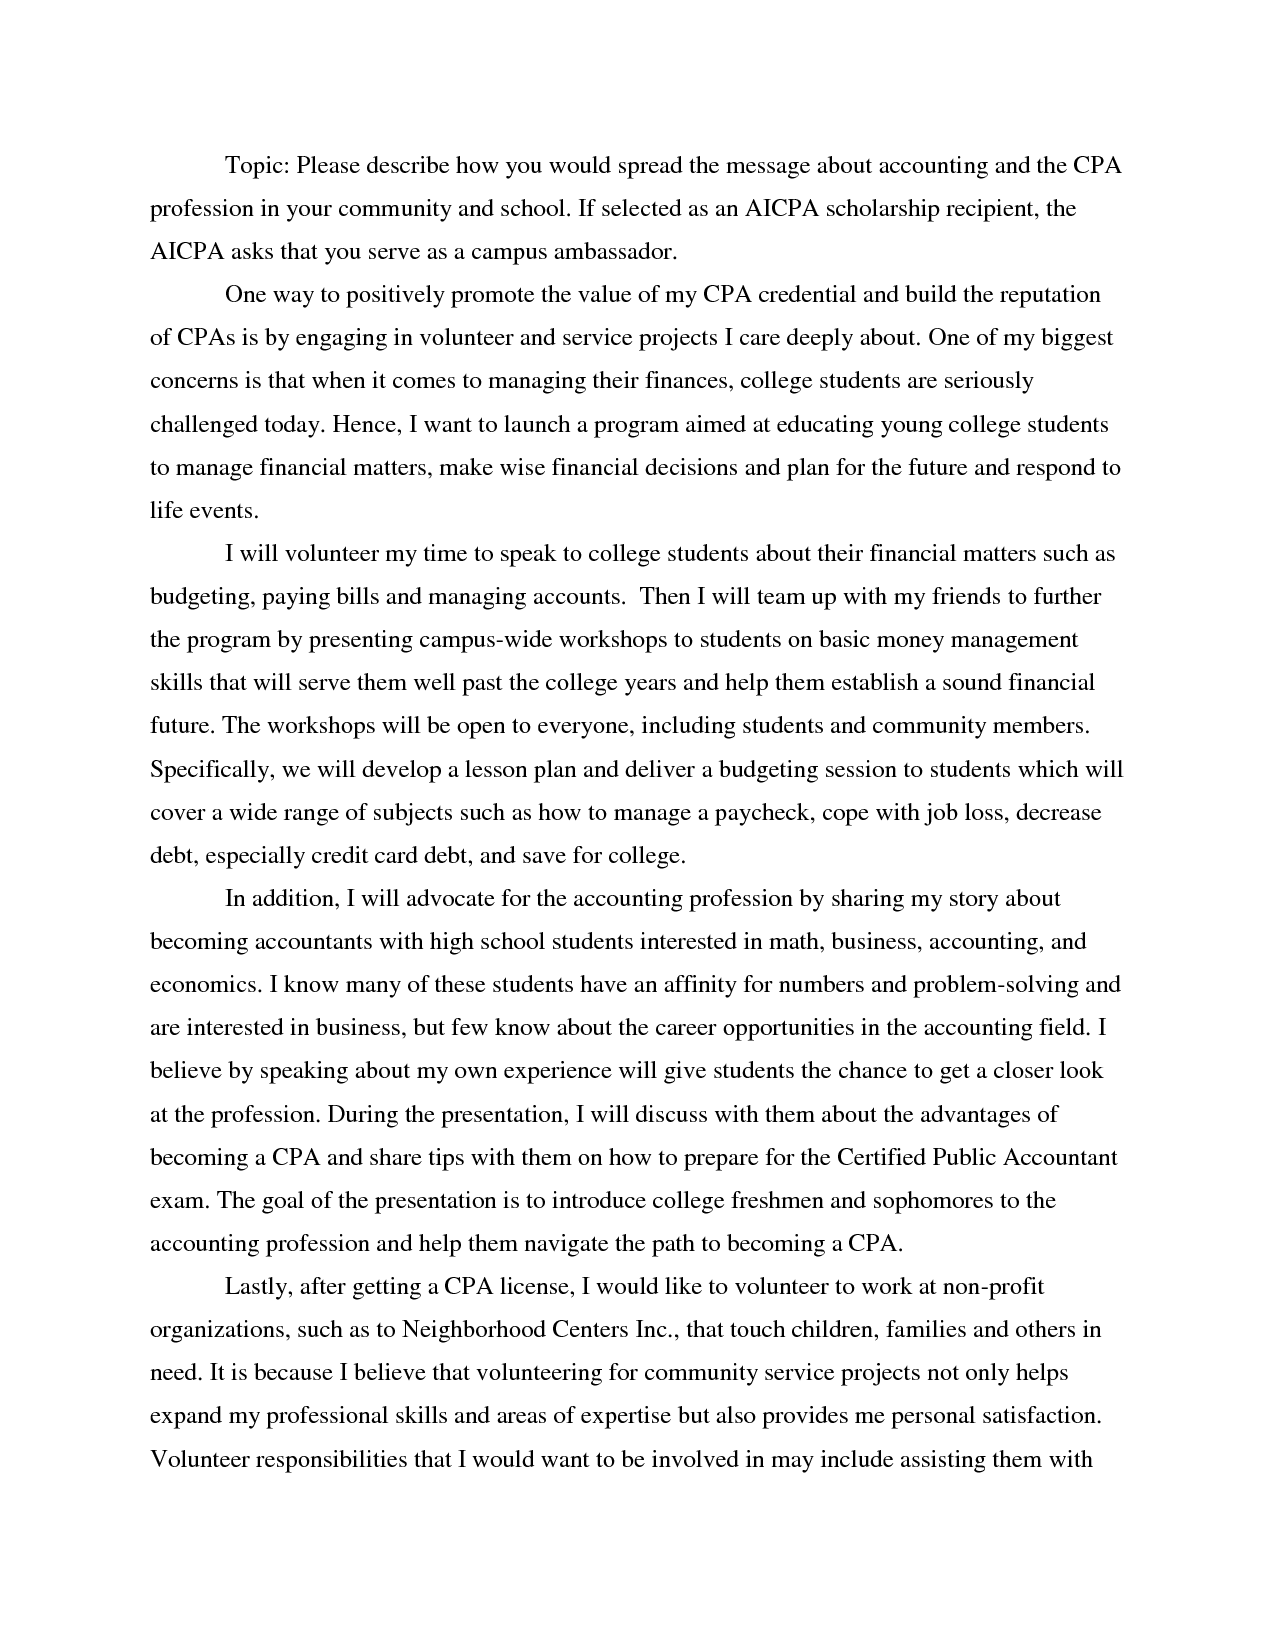 Essay about service in school